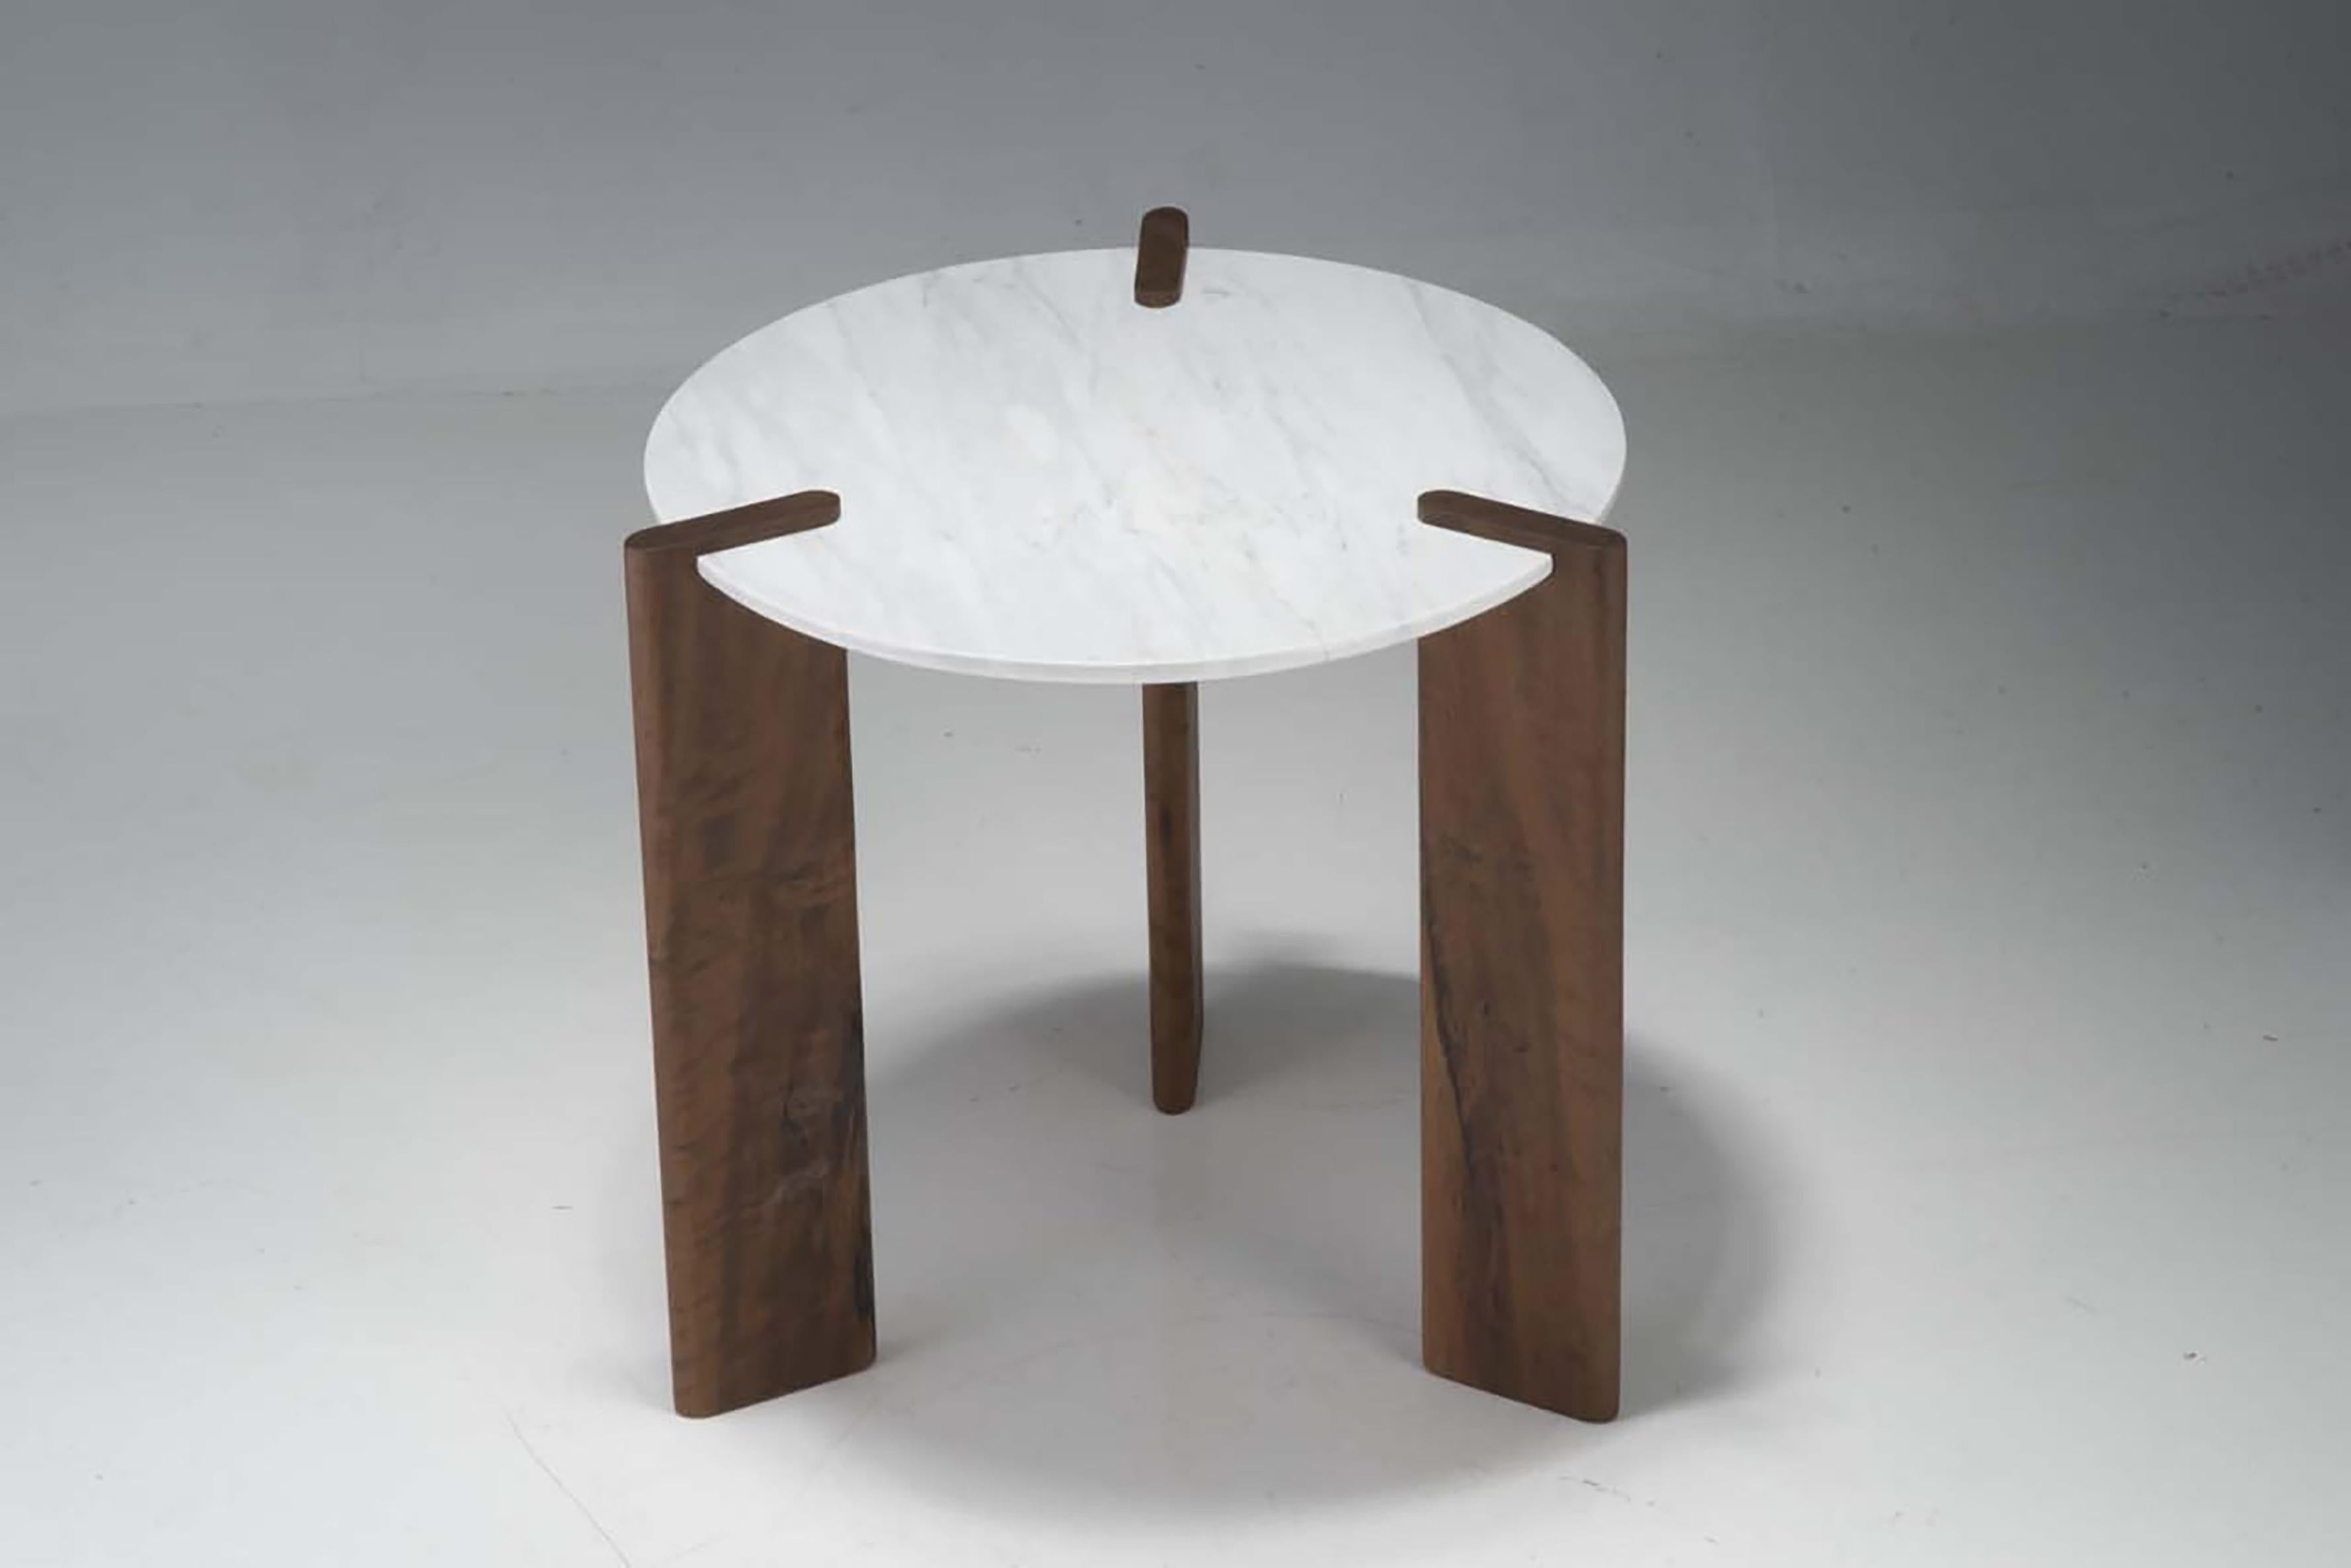 Carved Side Table by Juliana Vasconcellos in Brazilian Solid Wood and Carrara Marble